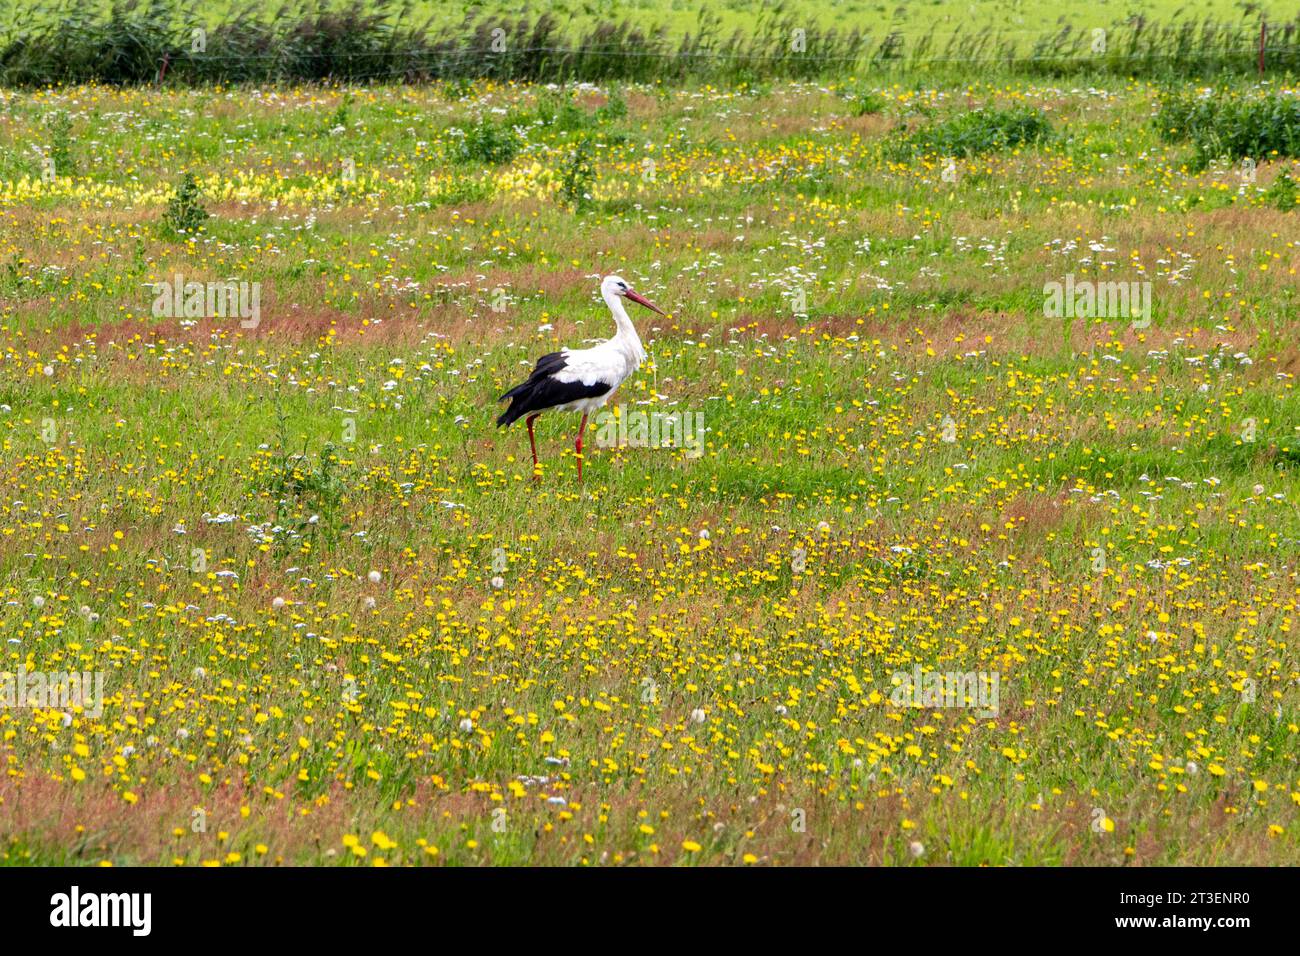 Storch à Fleesensee. *** Stork in Fleesensee Copyright : xBEAUTIFULxSPORTS/KJPetersx crédit : Imago/Alamy Live News Banque D'Images